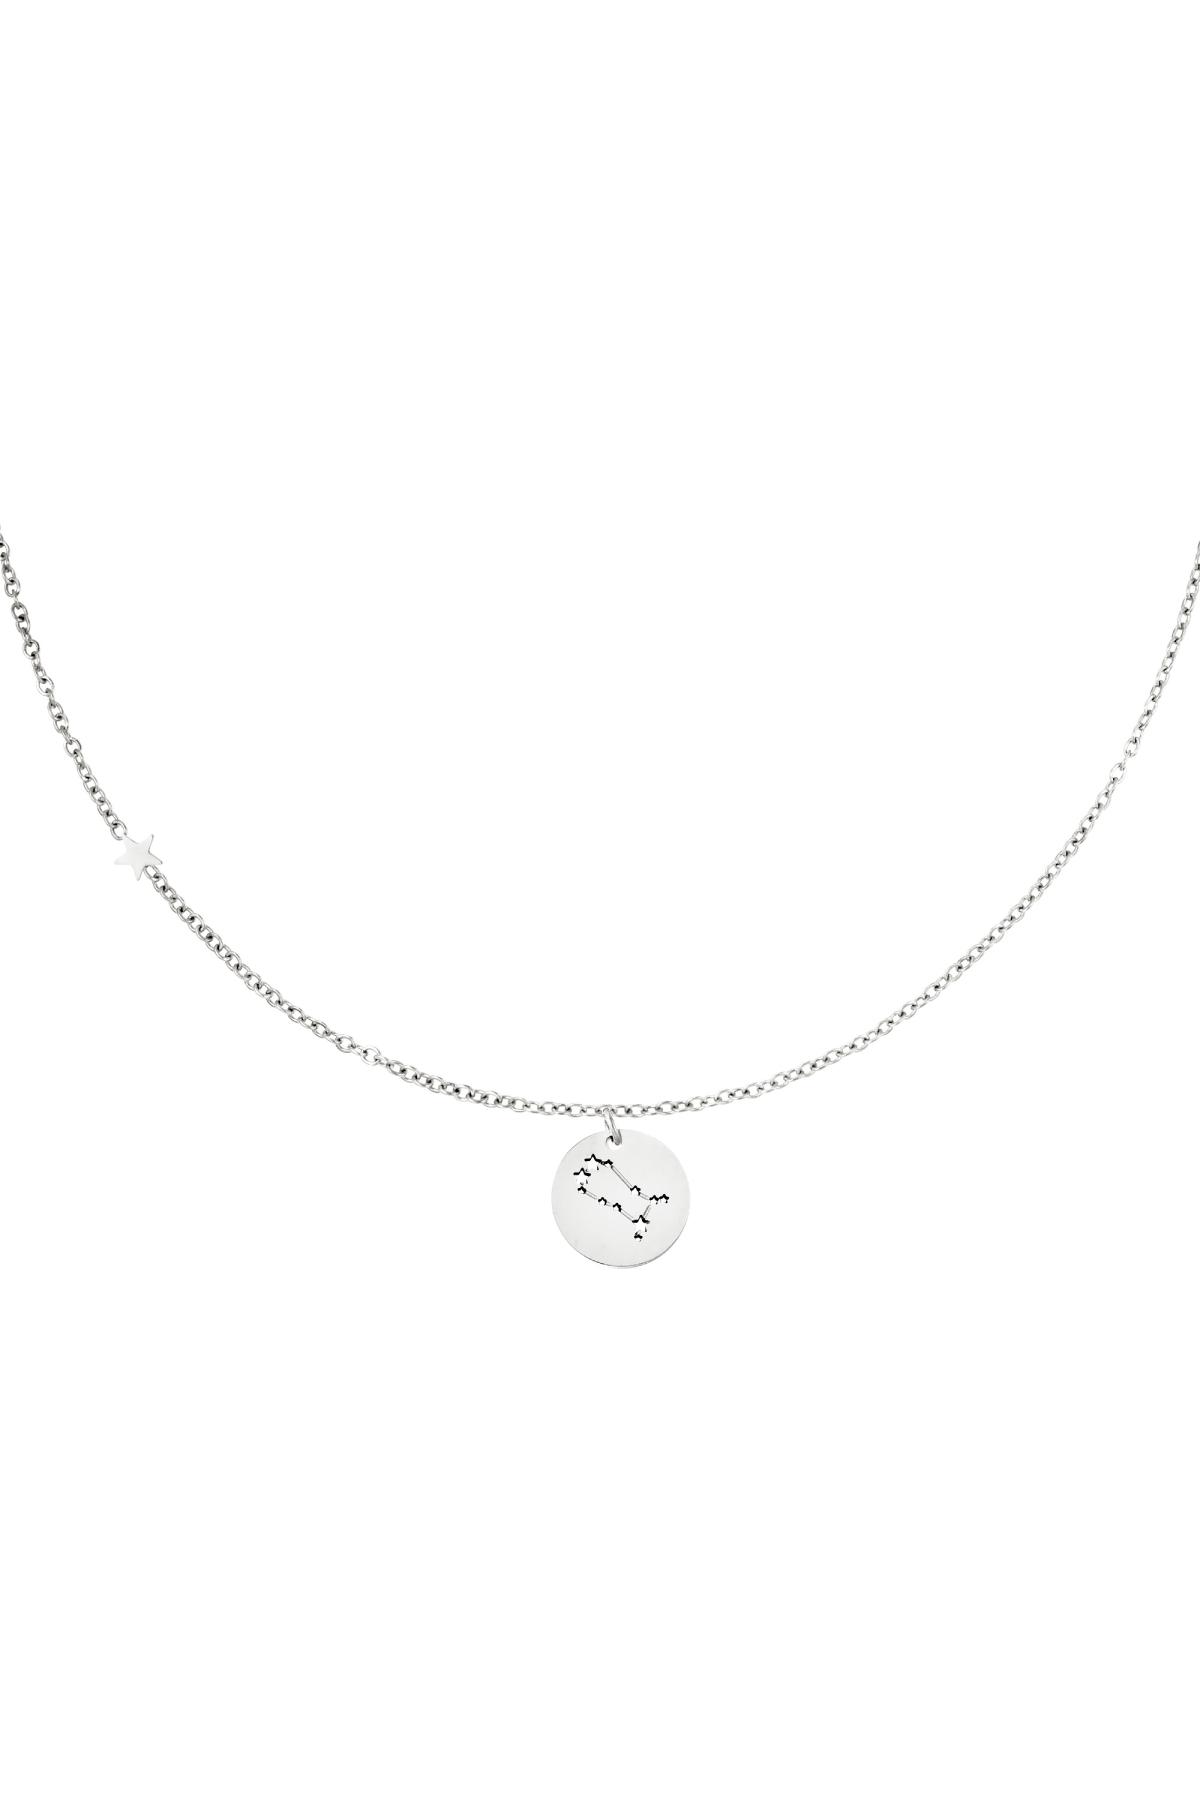 Necklace zodiac sign Gemini Silver Stainless Steel